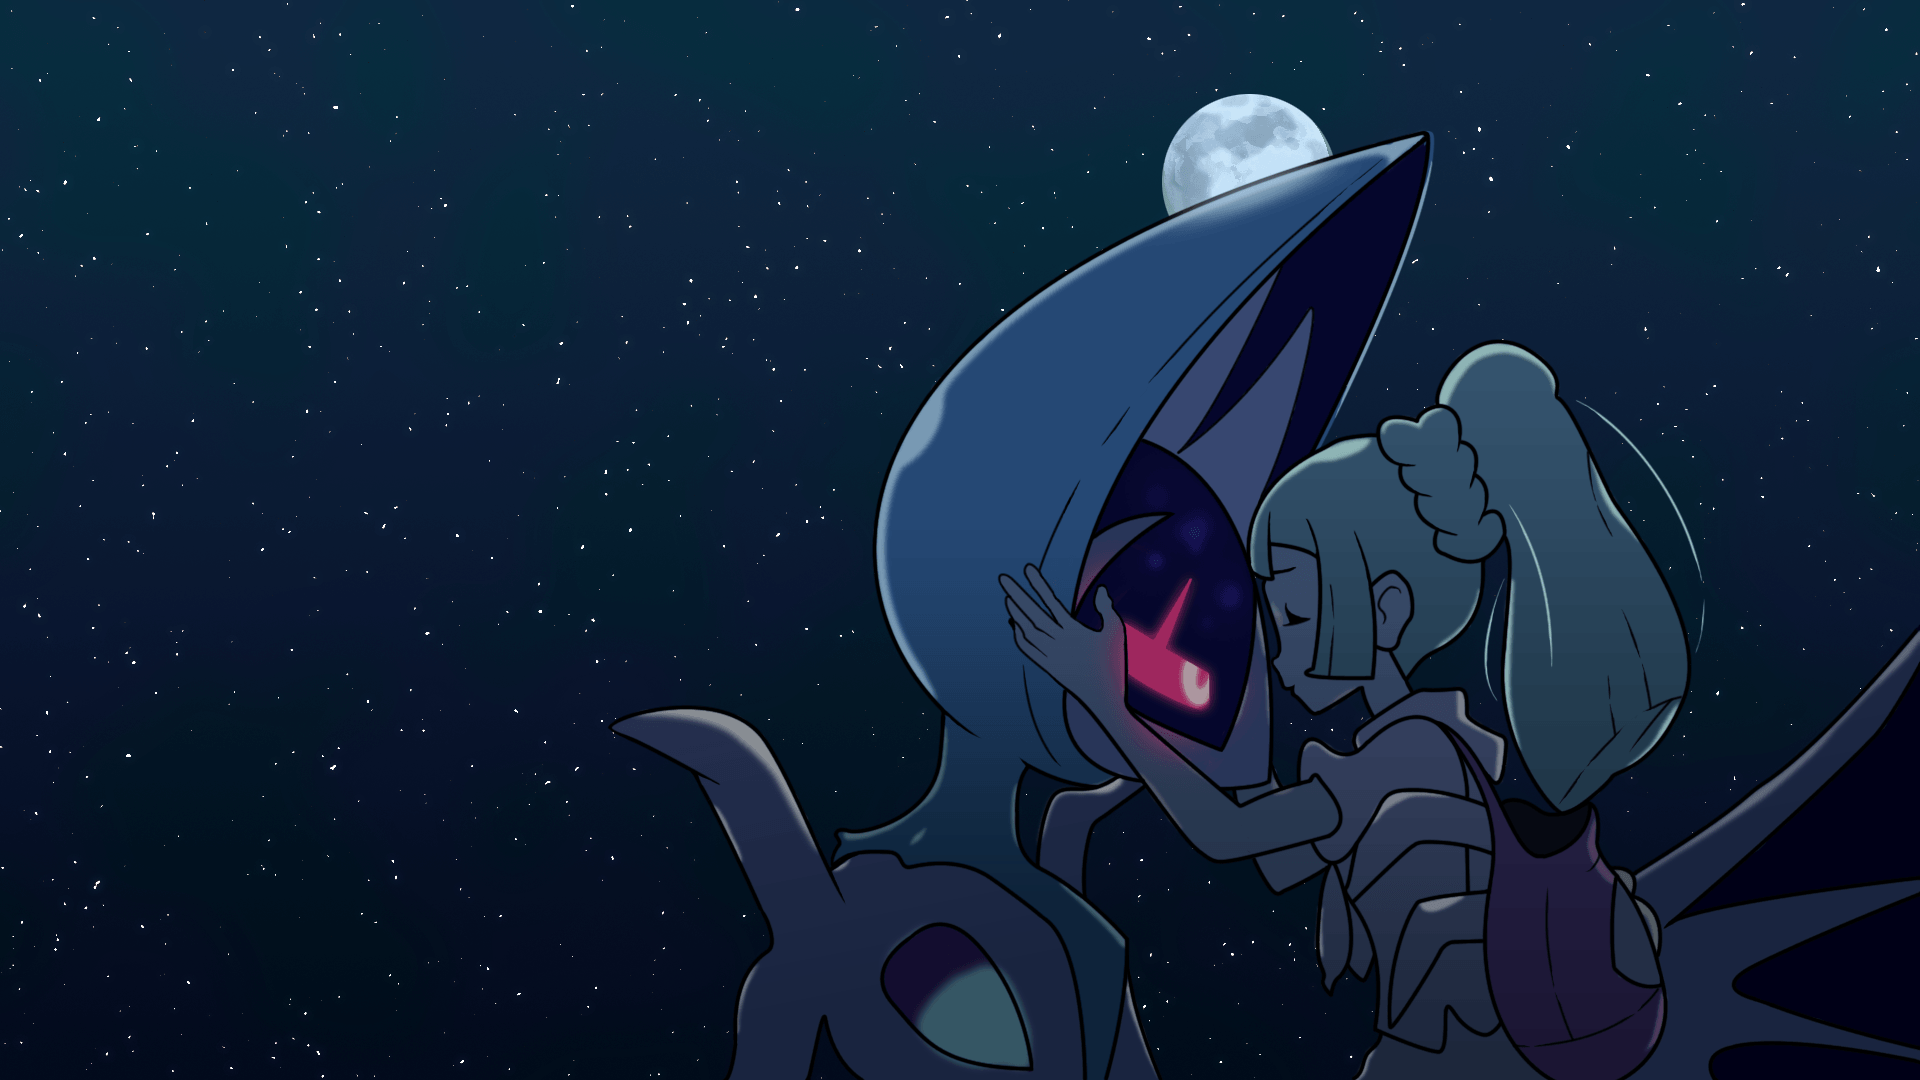 I recreated the credits image of Lillie and Lunala, and made a